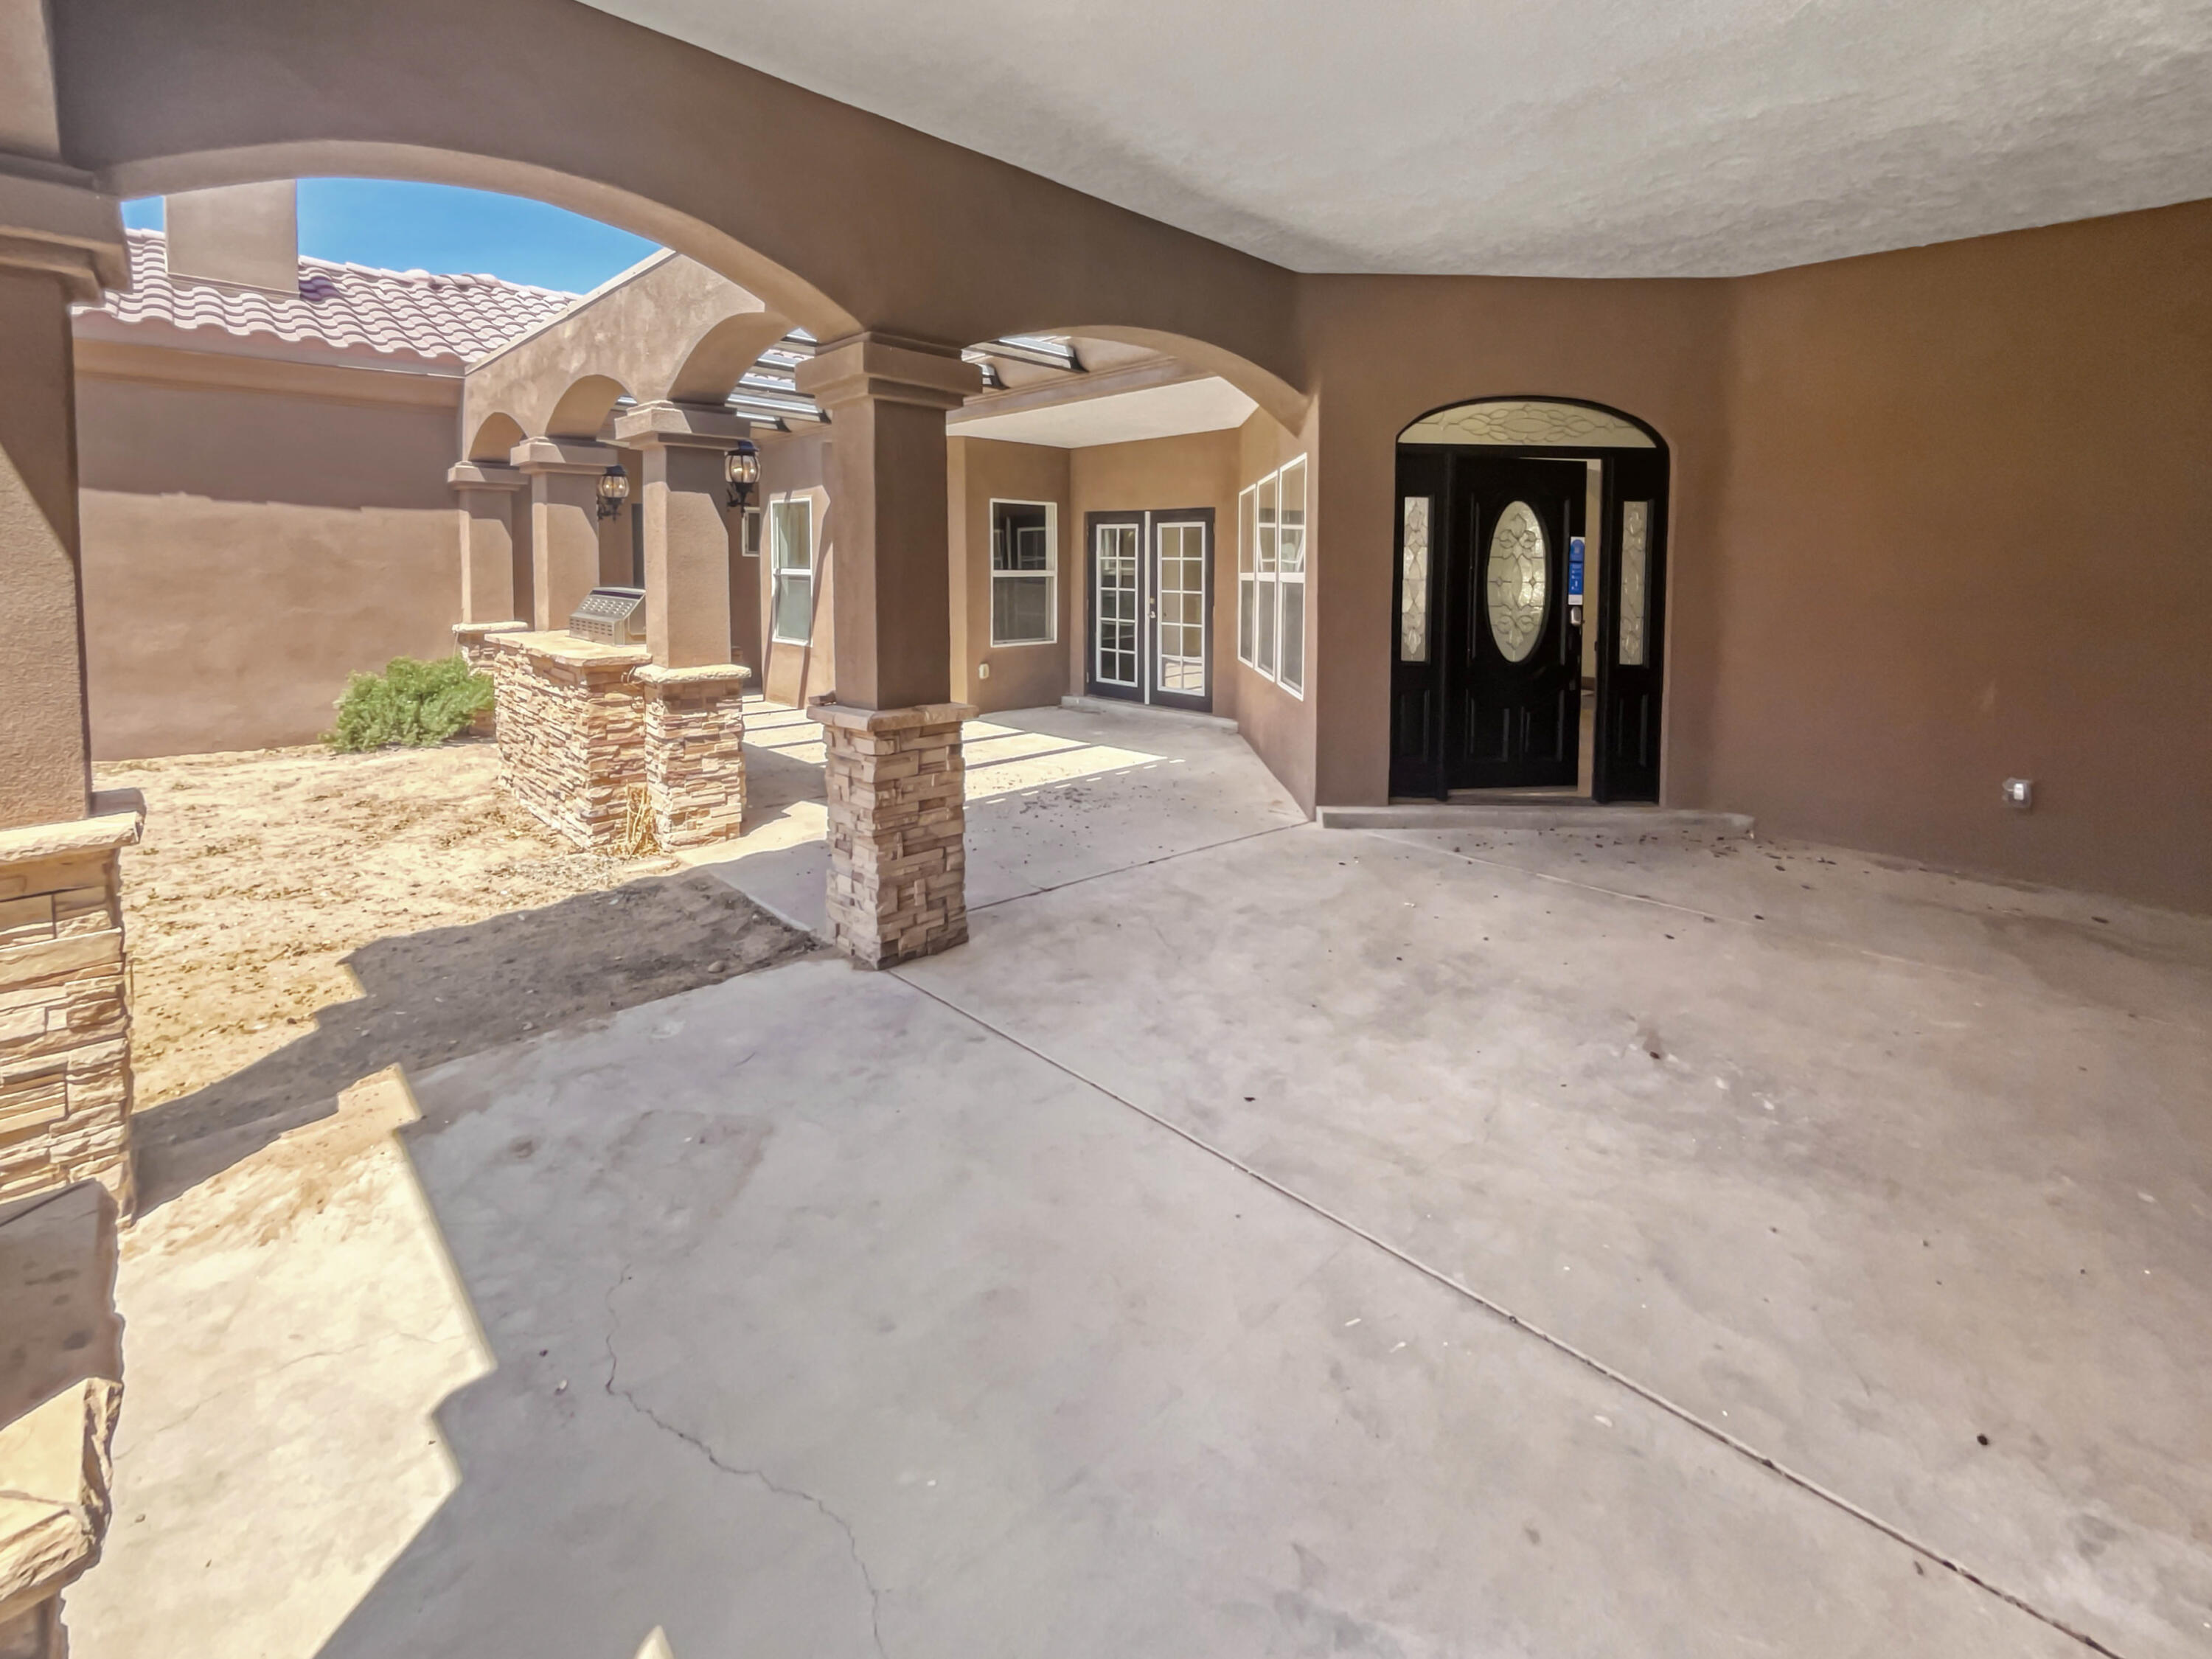 1117 12th Street SE, Rio Rancho, New Mexico 87124, 3 Bedrooms Bedrooms, ,2 BathroomsBathrooms,Residential,For Sale,1117 12th Street SE,1061279